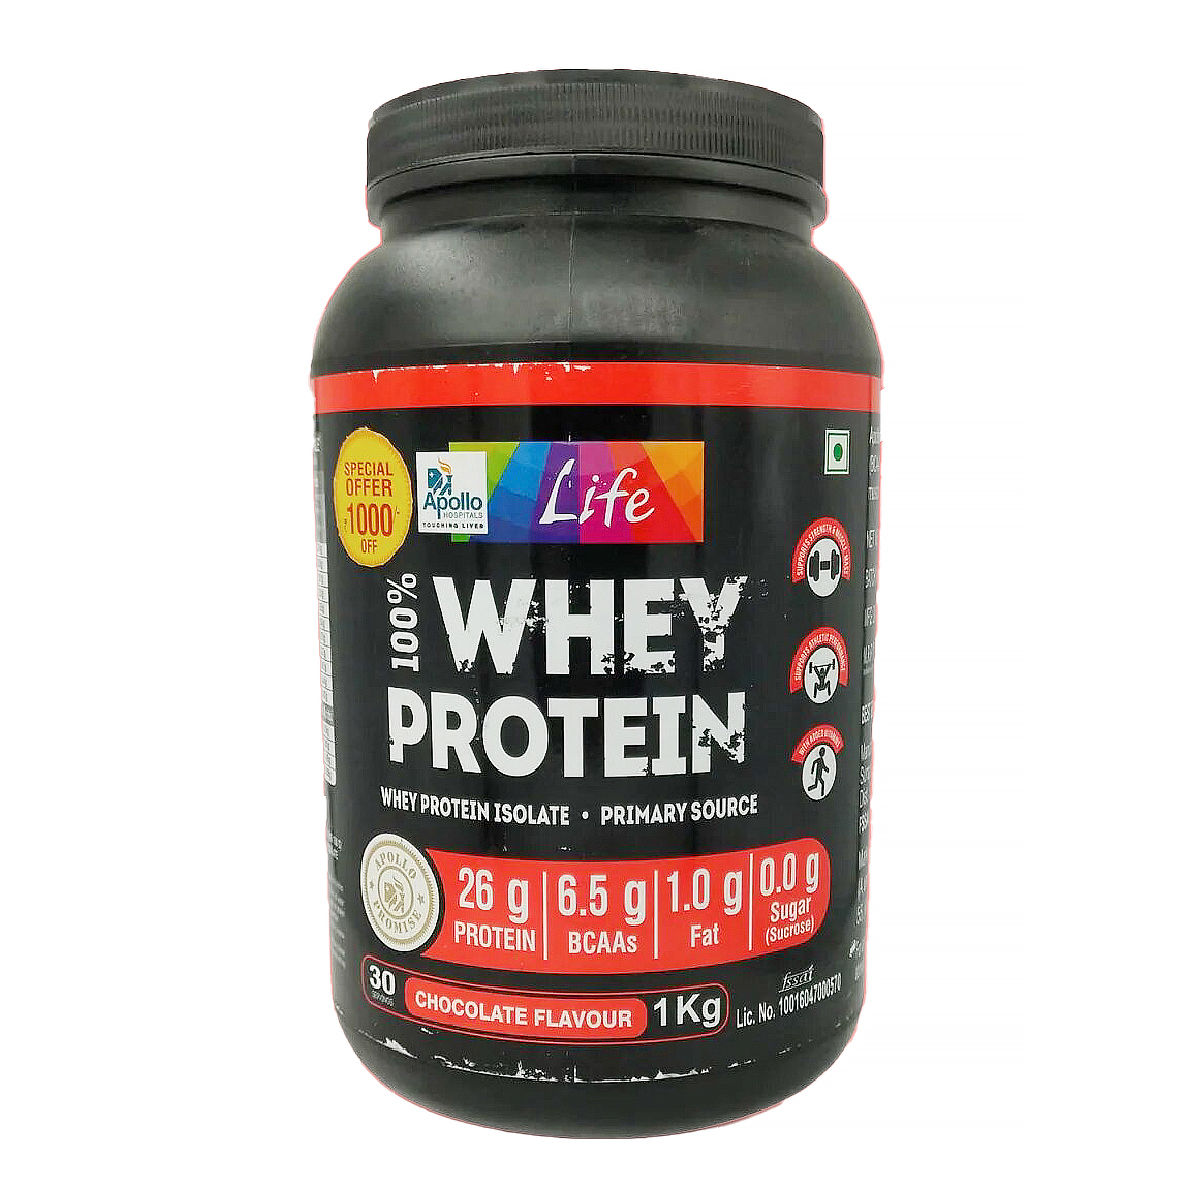 Apollo Life Whey Protein Chocolate Flavour Powder, 1 Kg, Pack of 1 